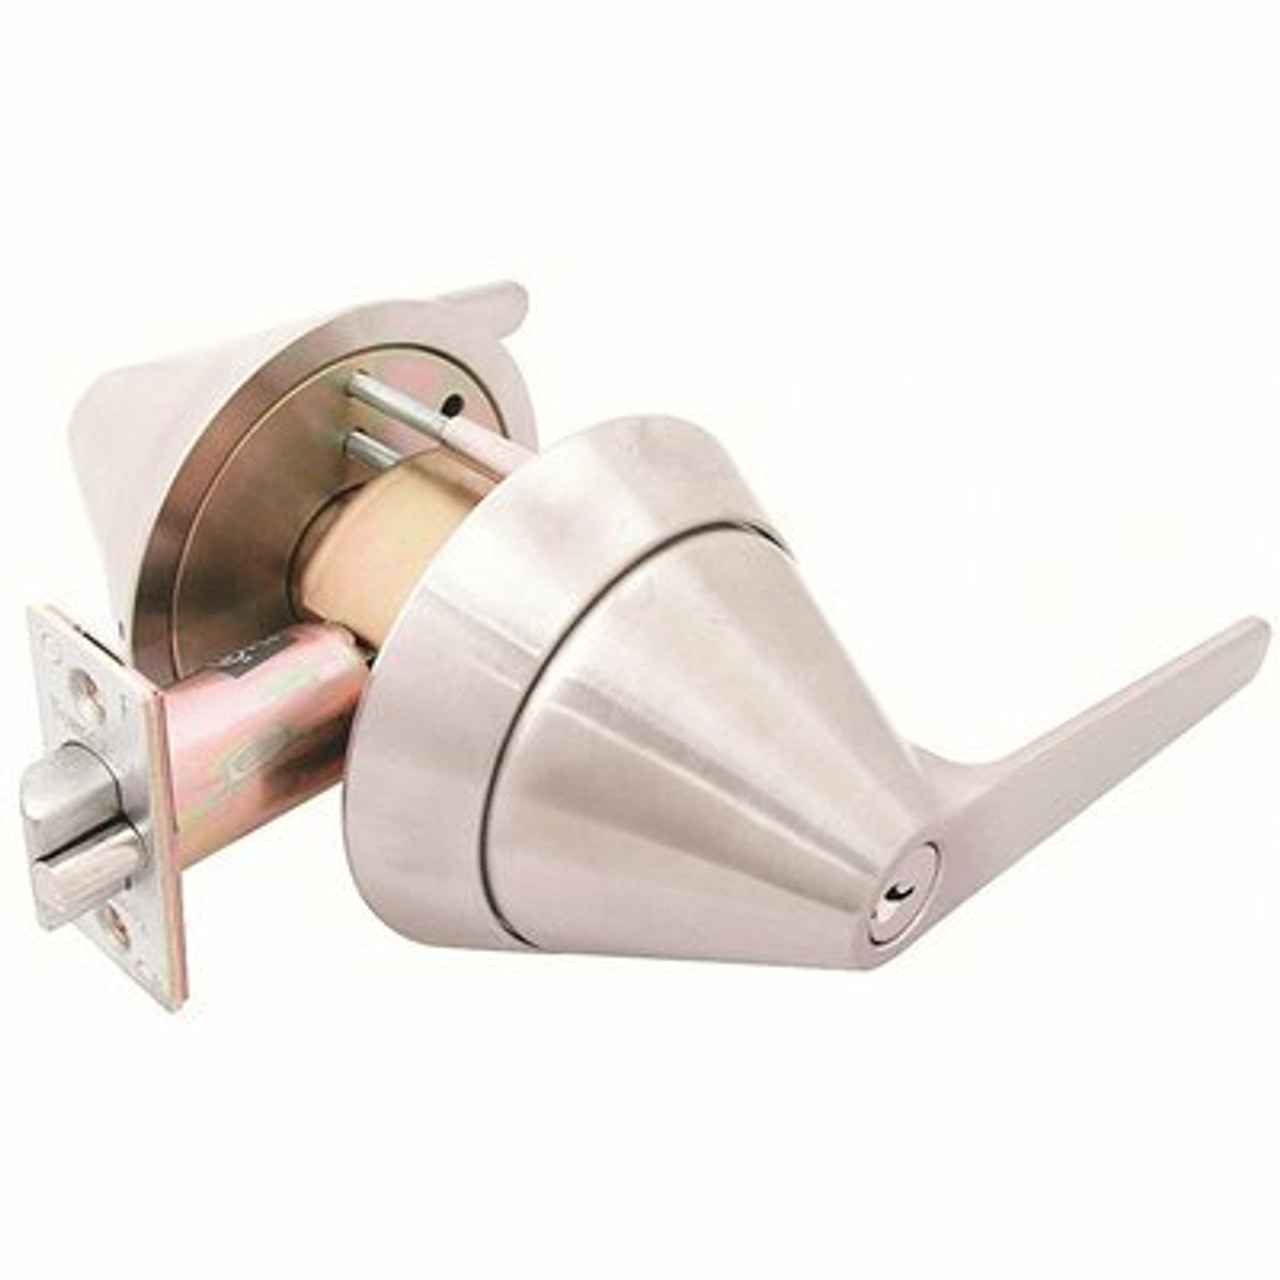 Townsteel Ligature Resistant Satin Stainless Steel Cylindrical Bed/Bath Door Lever Lock Privacy